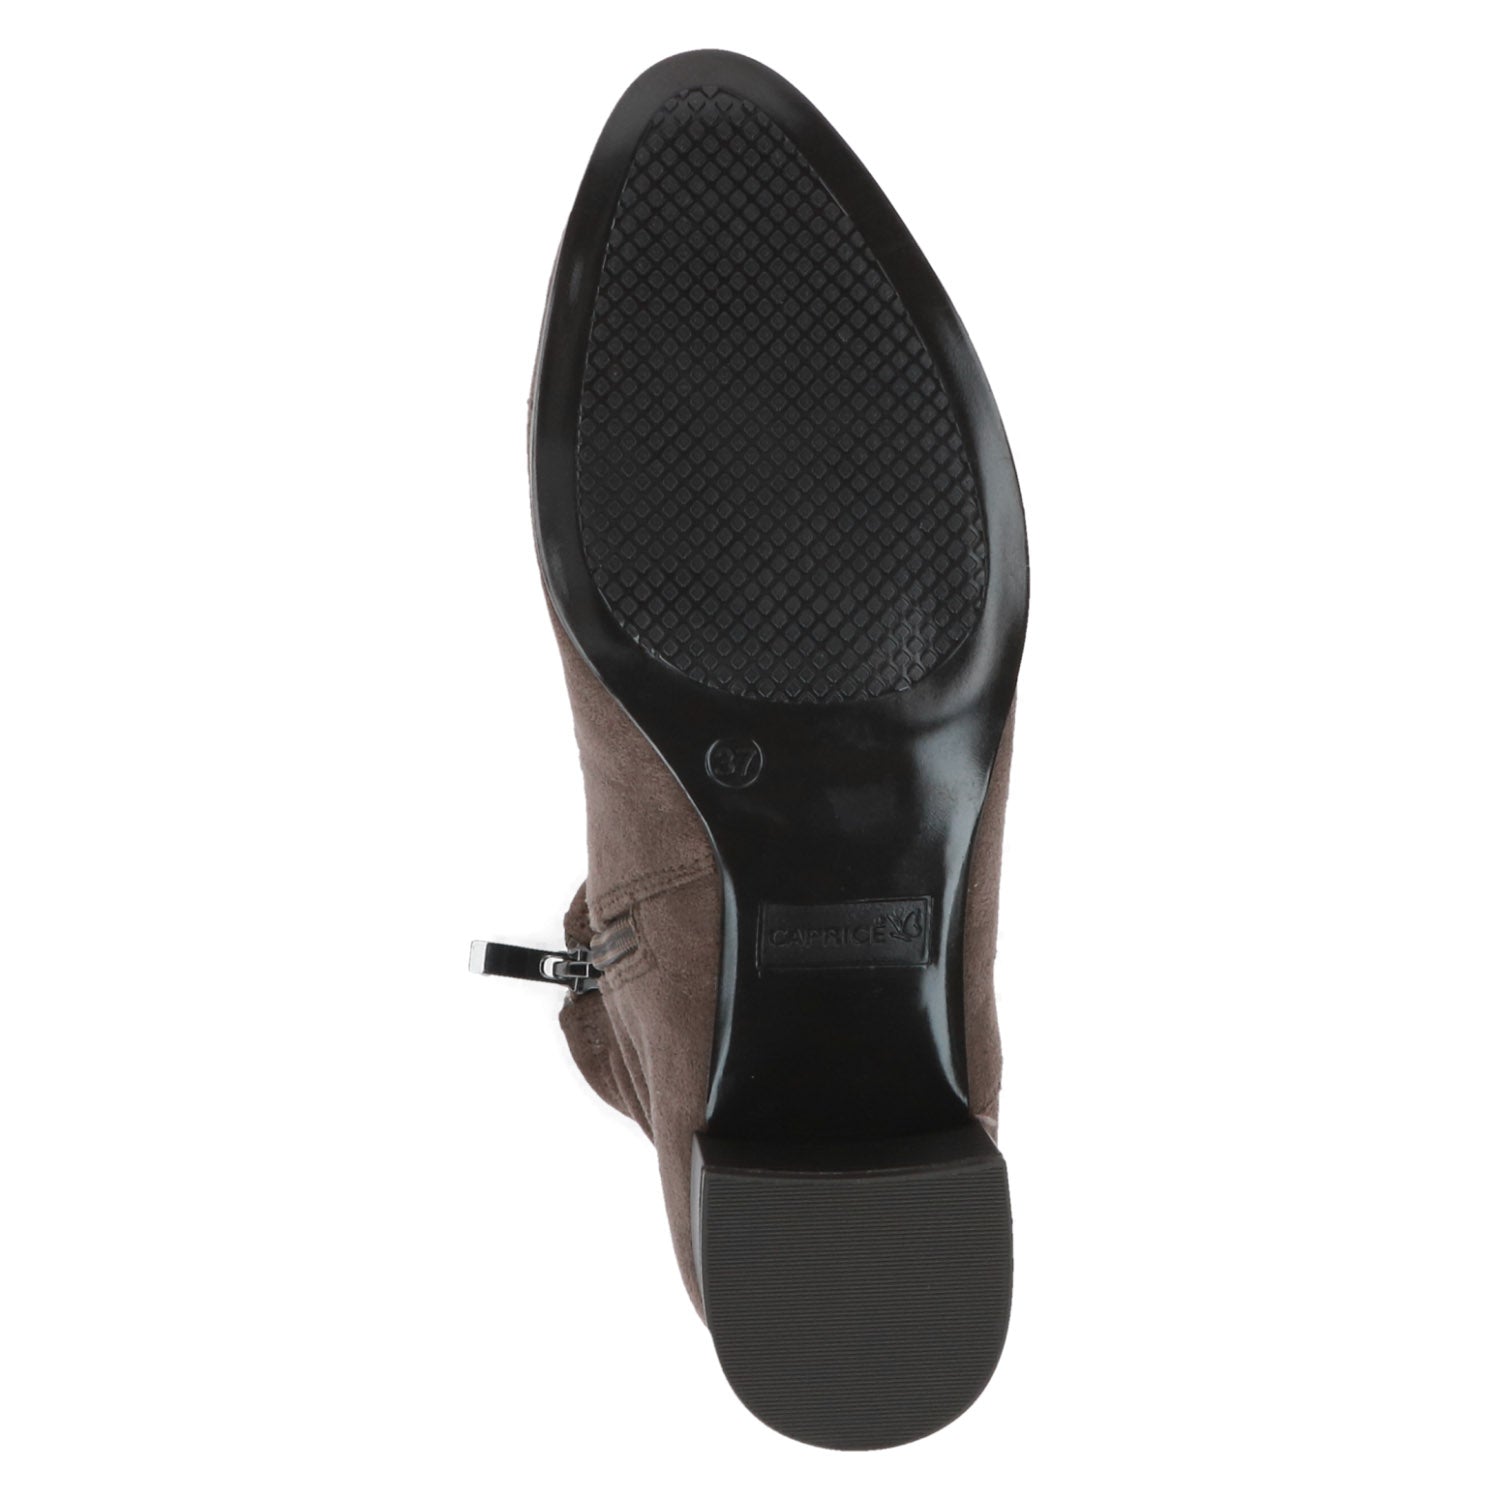 Sole of the boot and bottom of heel - Showcasing the durable outsole and block heel.